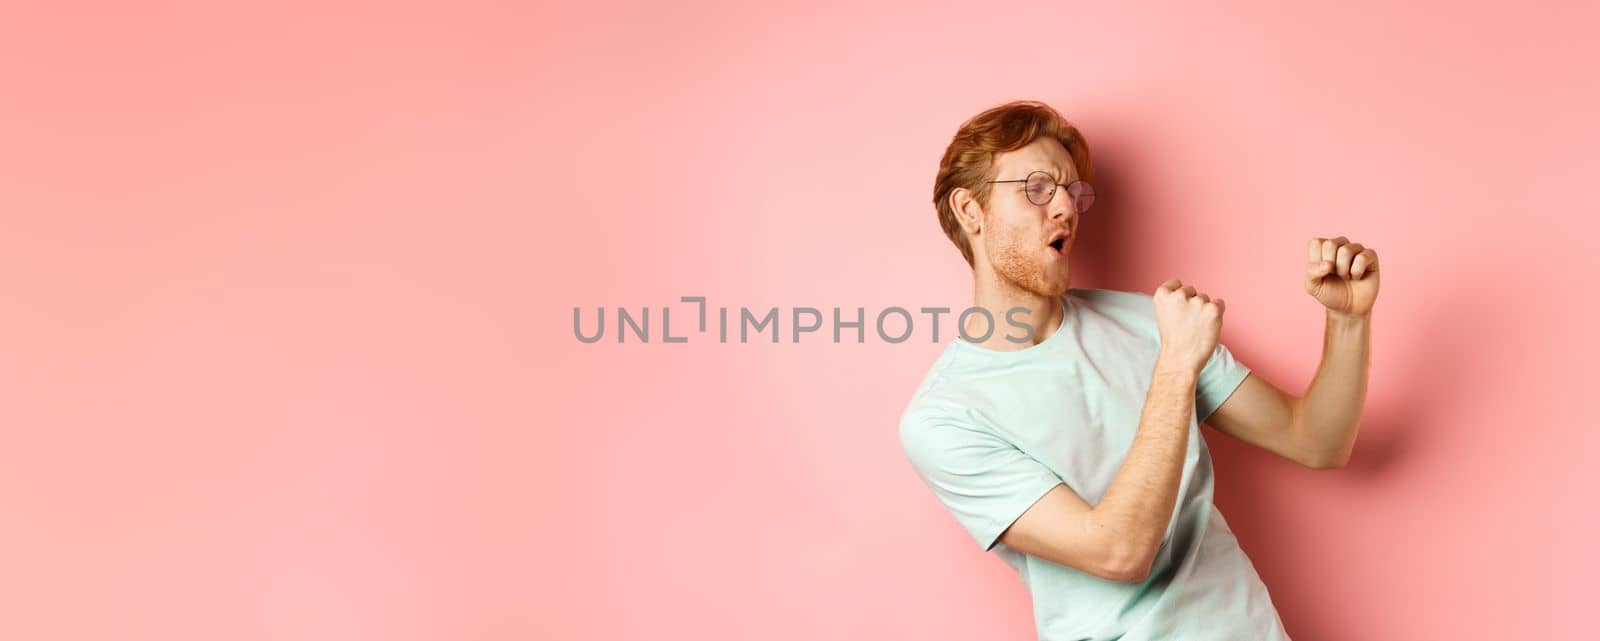 Cheerful redhead guy listening music and dancing, triumphing or celebrating success, standing over pink background.